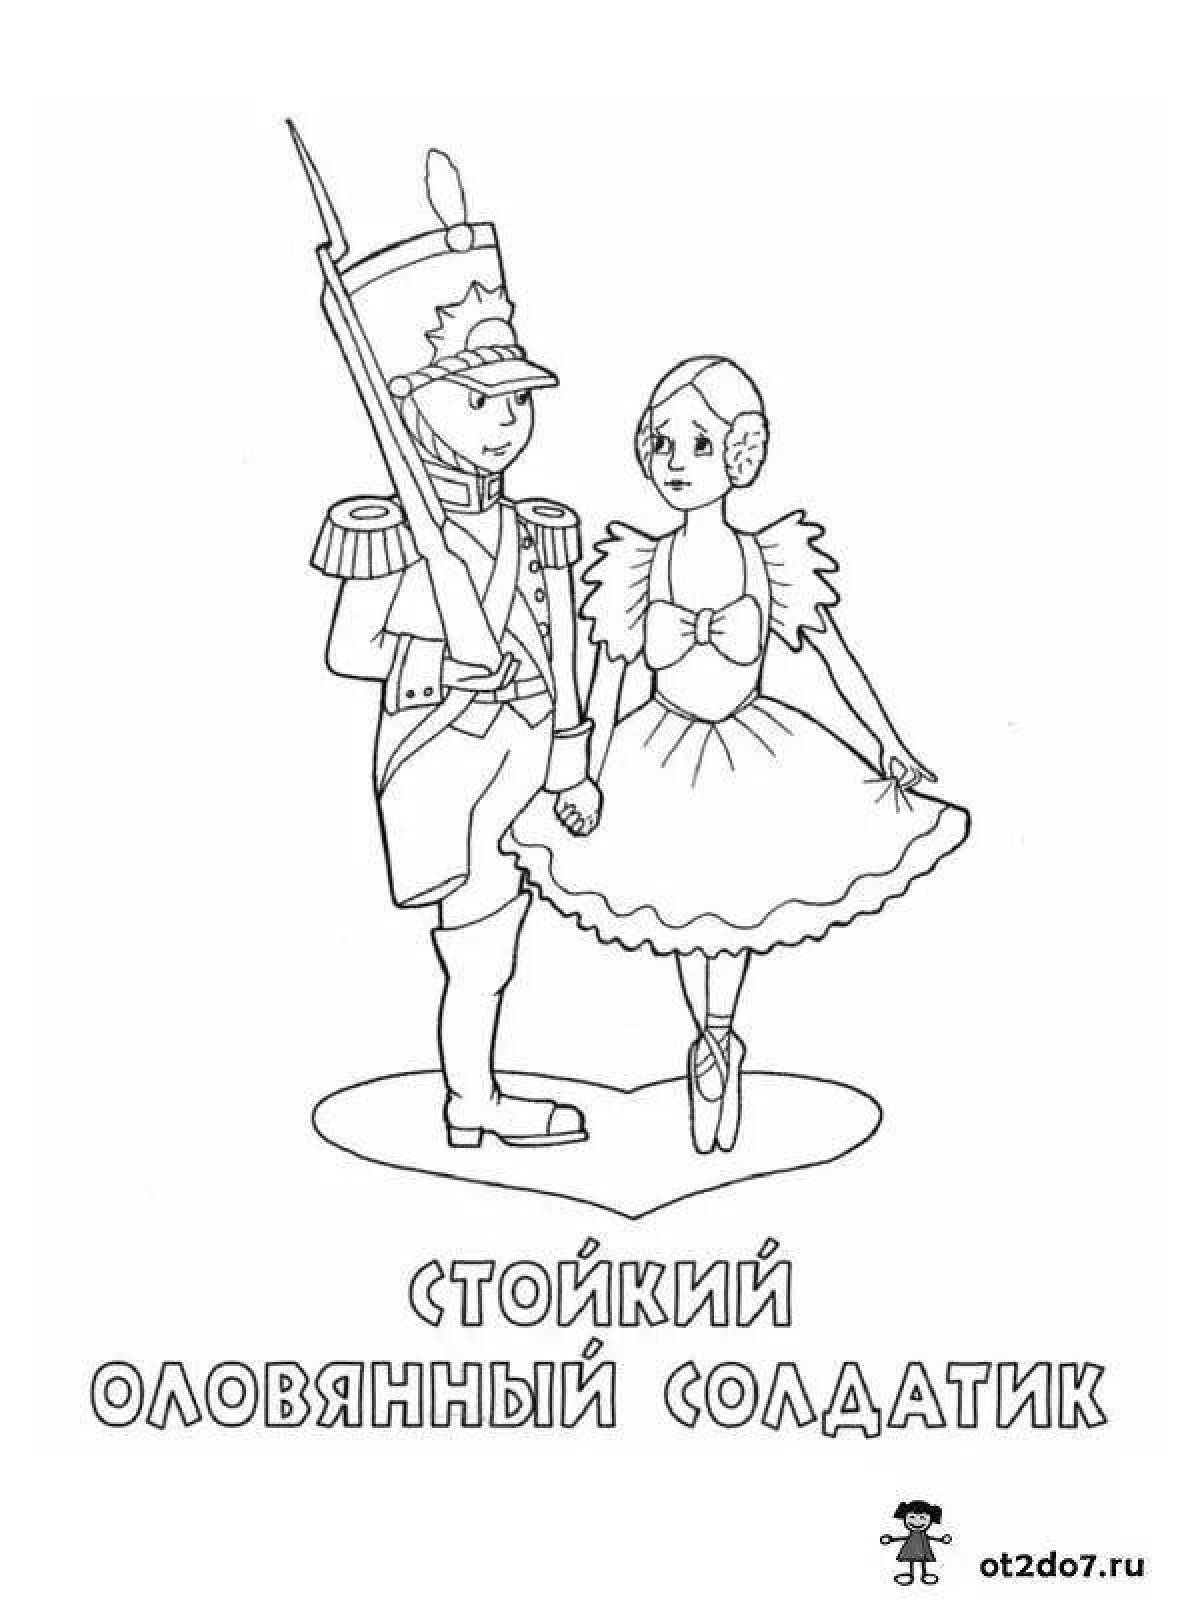 Strong Tin Soldier Inspirational Coloring Page